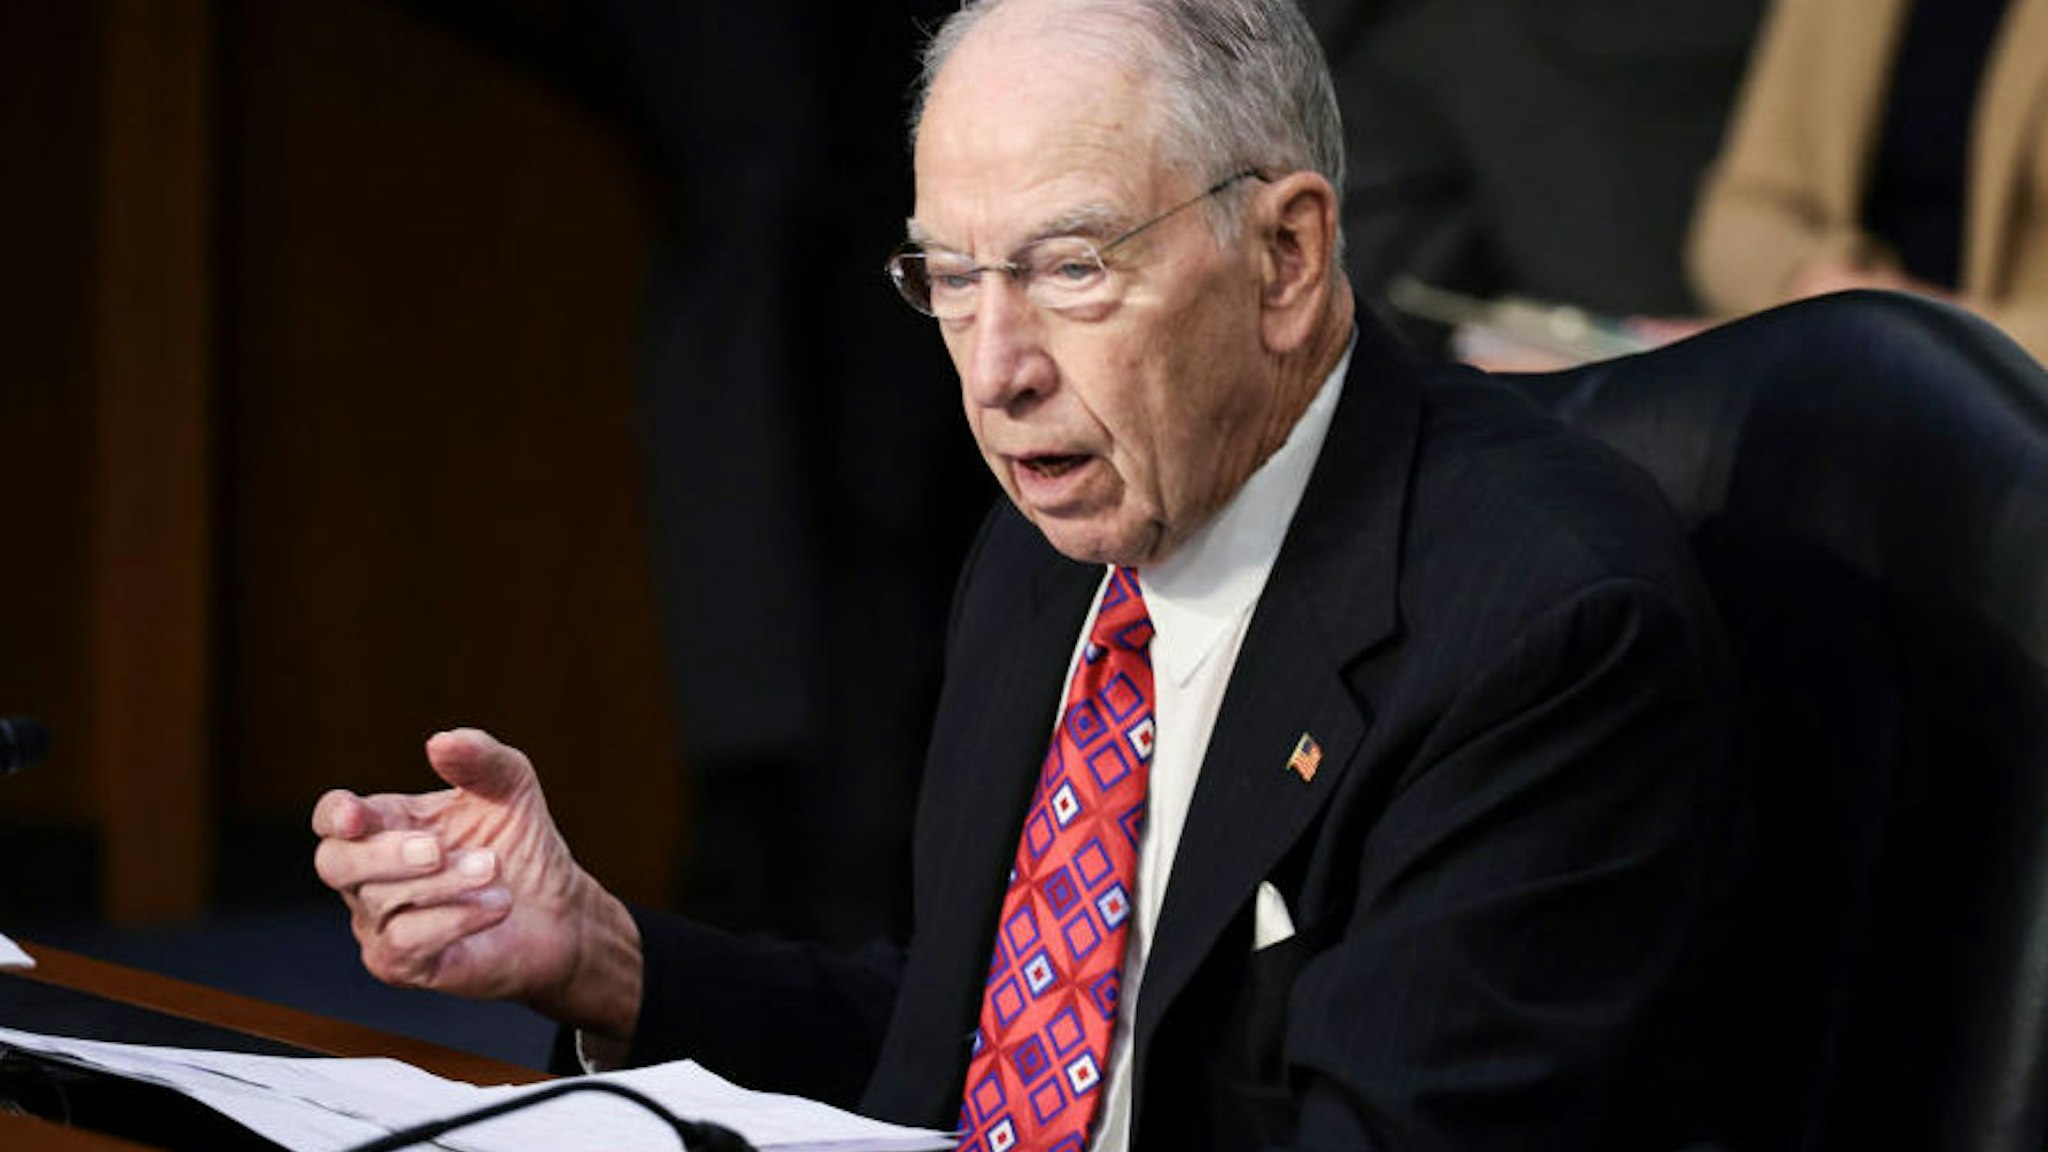 WASHINGTON, DC - SEPTEMBER 15: Ranking member Sen. Chuck Grassley (R-IA) speaks during a Senate Judiciary hearing about the Inspector General's report on the FBI handling of the Larry Nassar investigation of sexual abuse of Olympic gymnasts, on Capitol Hill on September 15, 2021 in Washington, DC. Maroney, along with other U.S. Gymnasts gave testimony on the abuse they experienced at the hand of Larry Nassar, the former US women's national gymnastics team doctor, and the FBI’s lack of urgency when handling their cases.